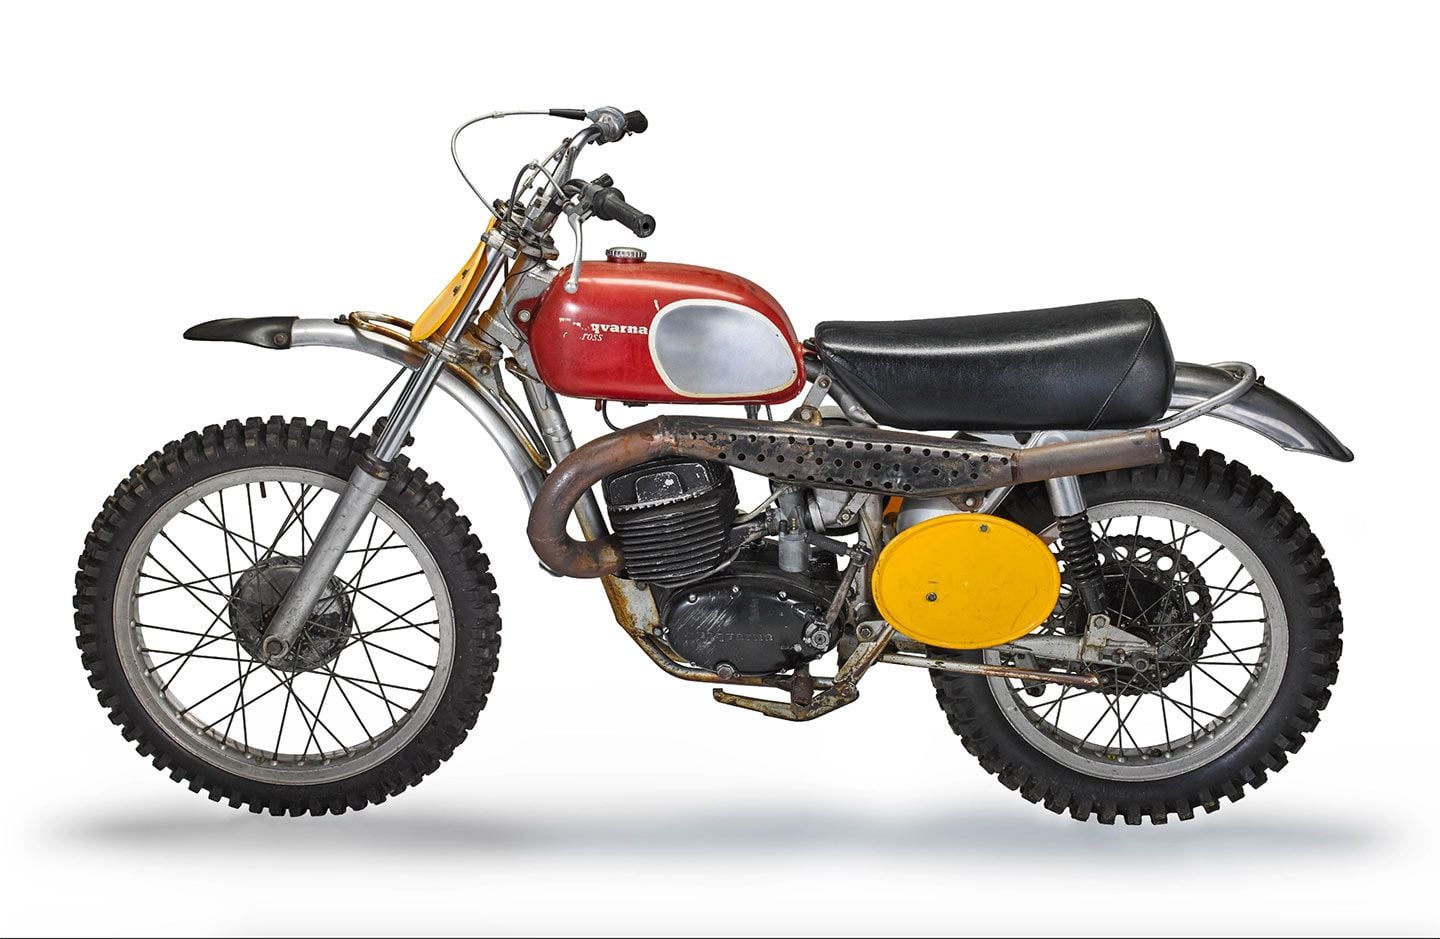 Two-strokes and a single cylinder were enough to change motocross orthodoxy forever. Oh, and some famous guy apparently owned this 1970 Husqvarna 400 Cross.